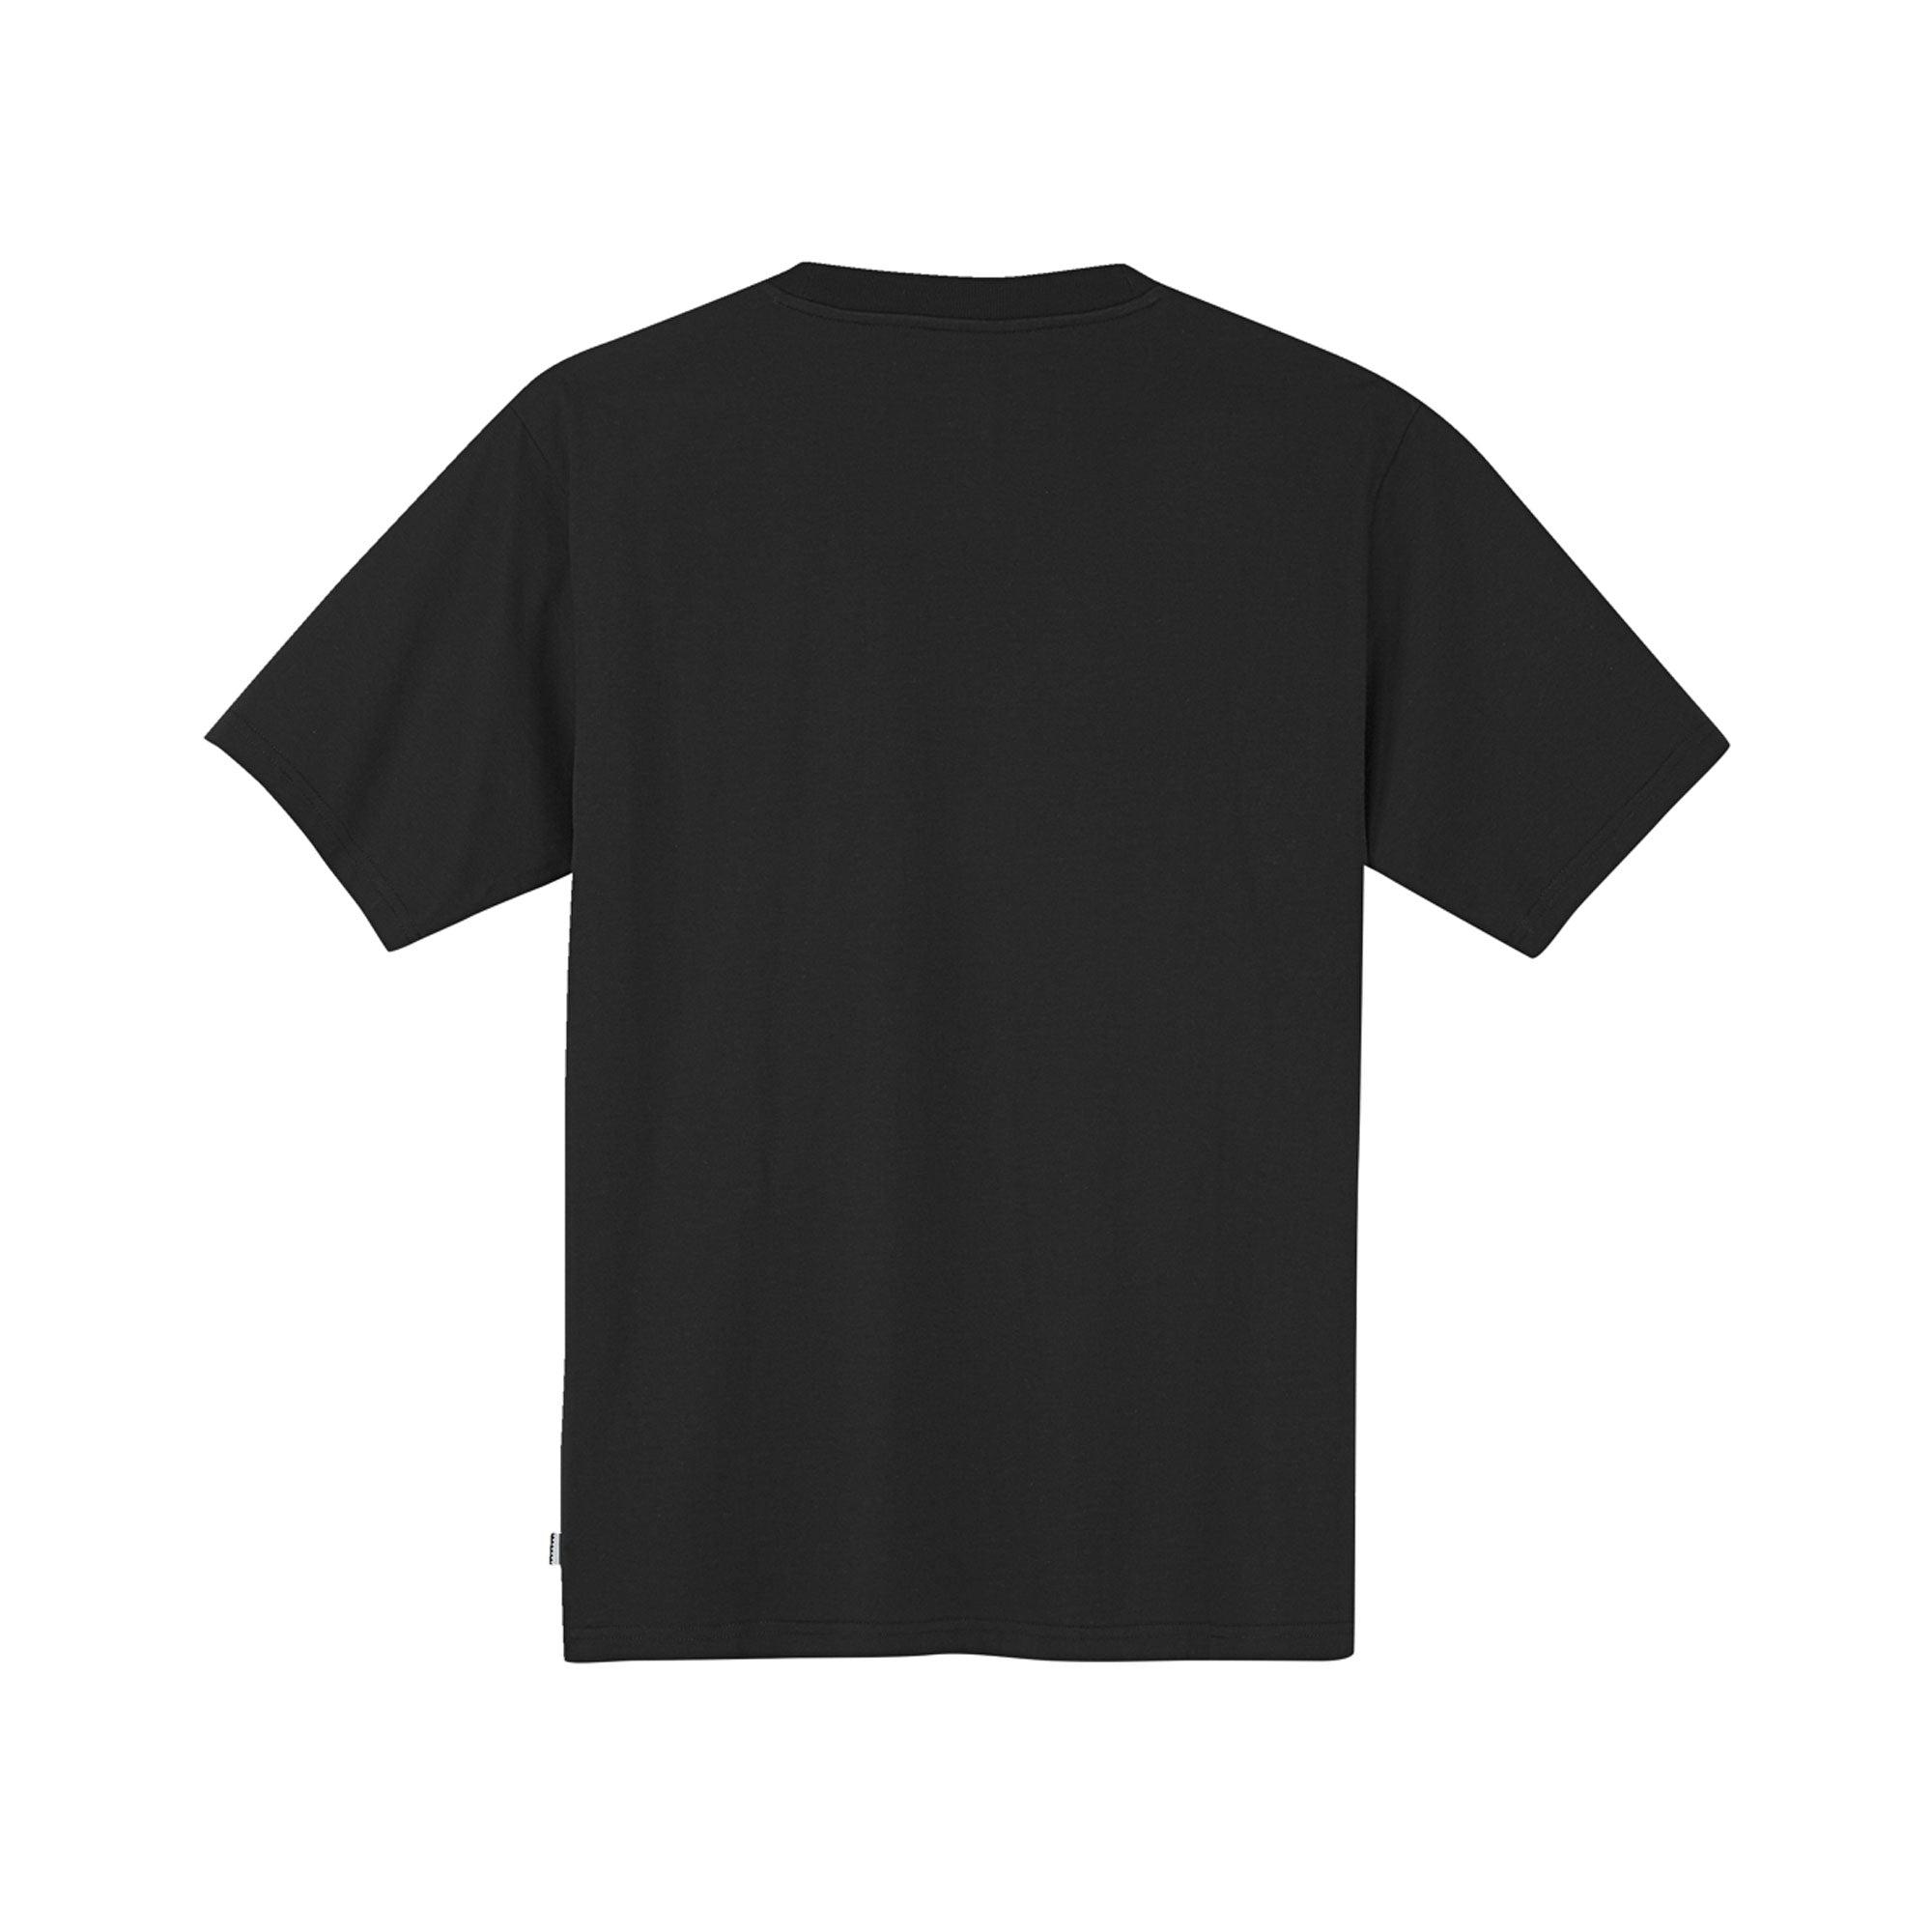 adidas Cotton Shmoo T-shirt in Black for Men - Lyst